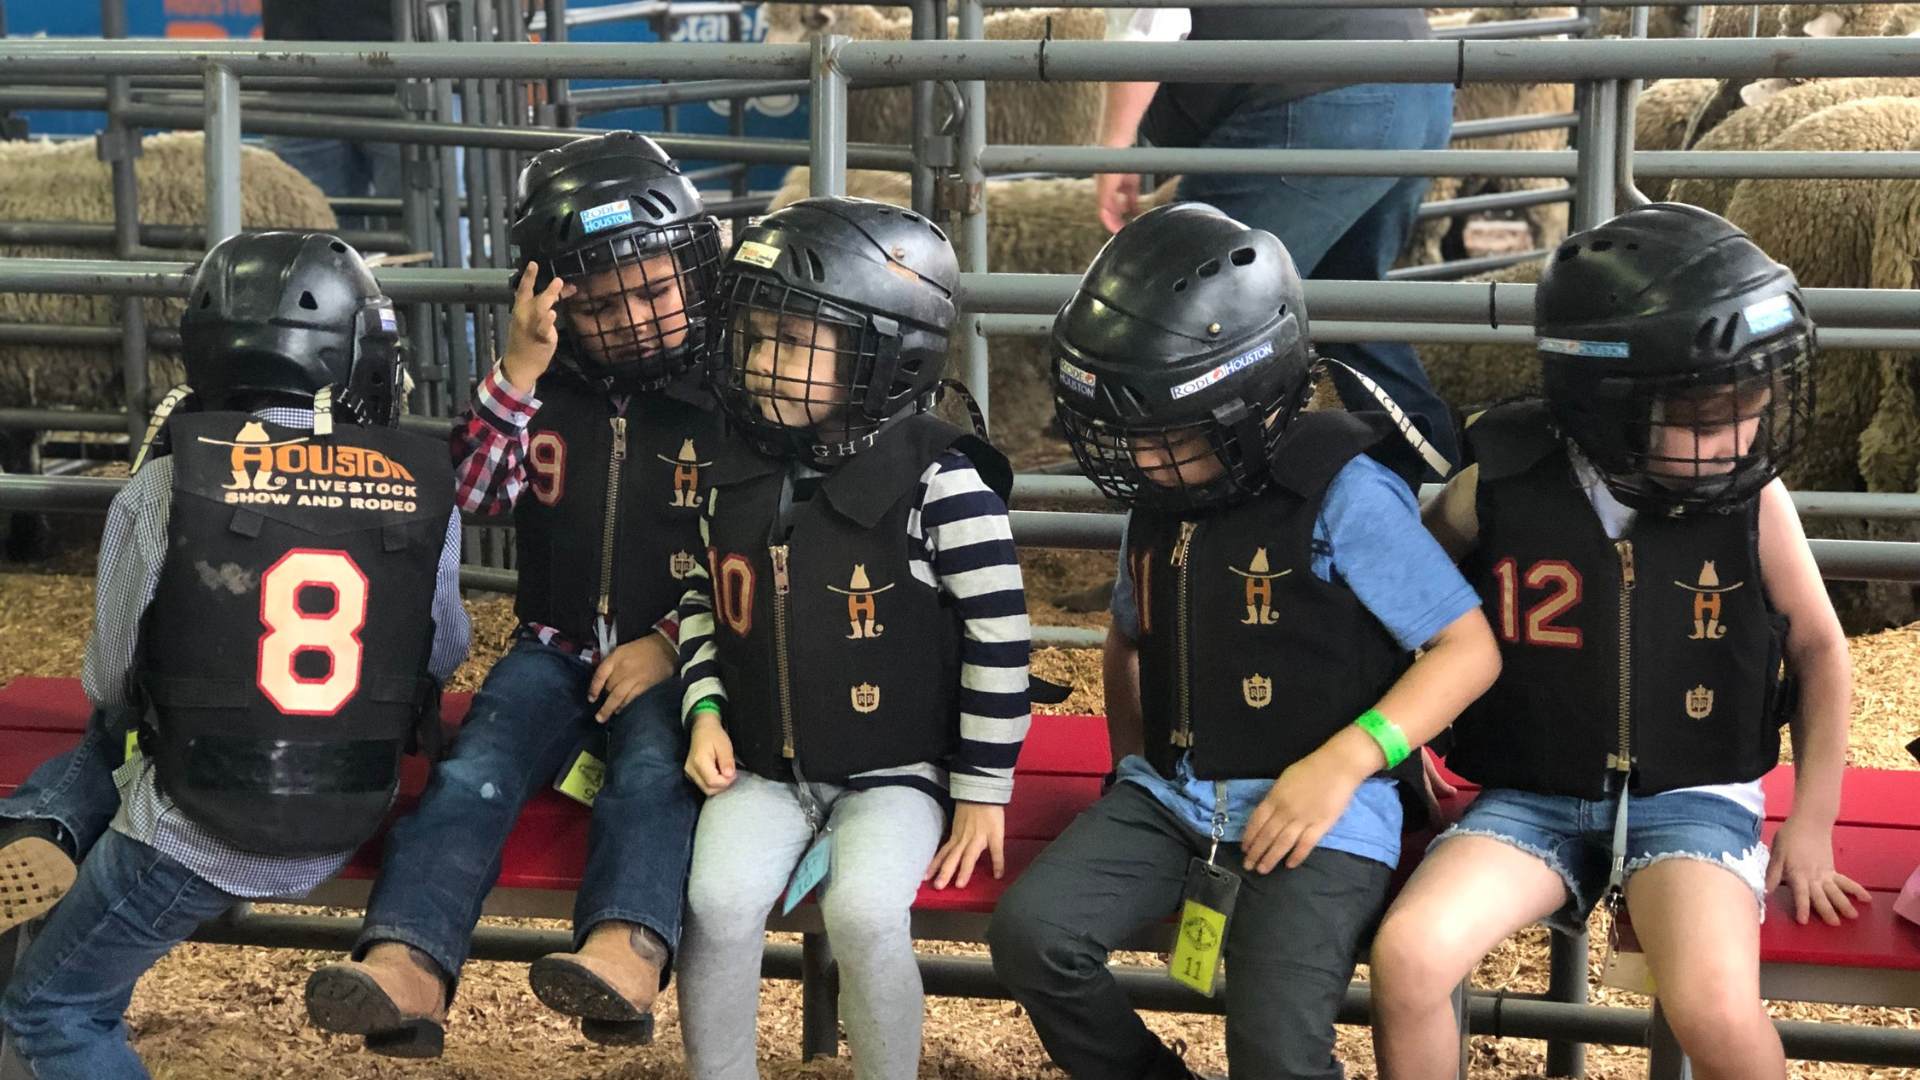 kids getting prepped up for Rodeo show